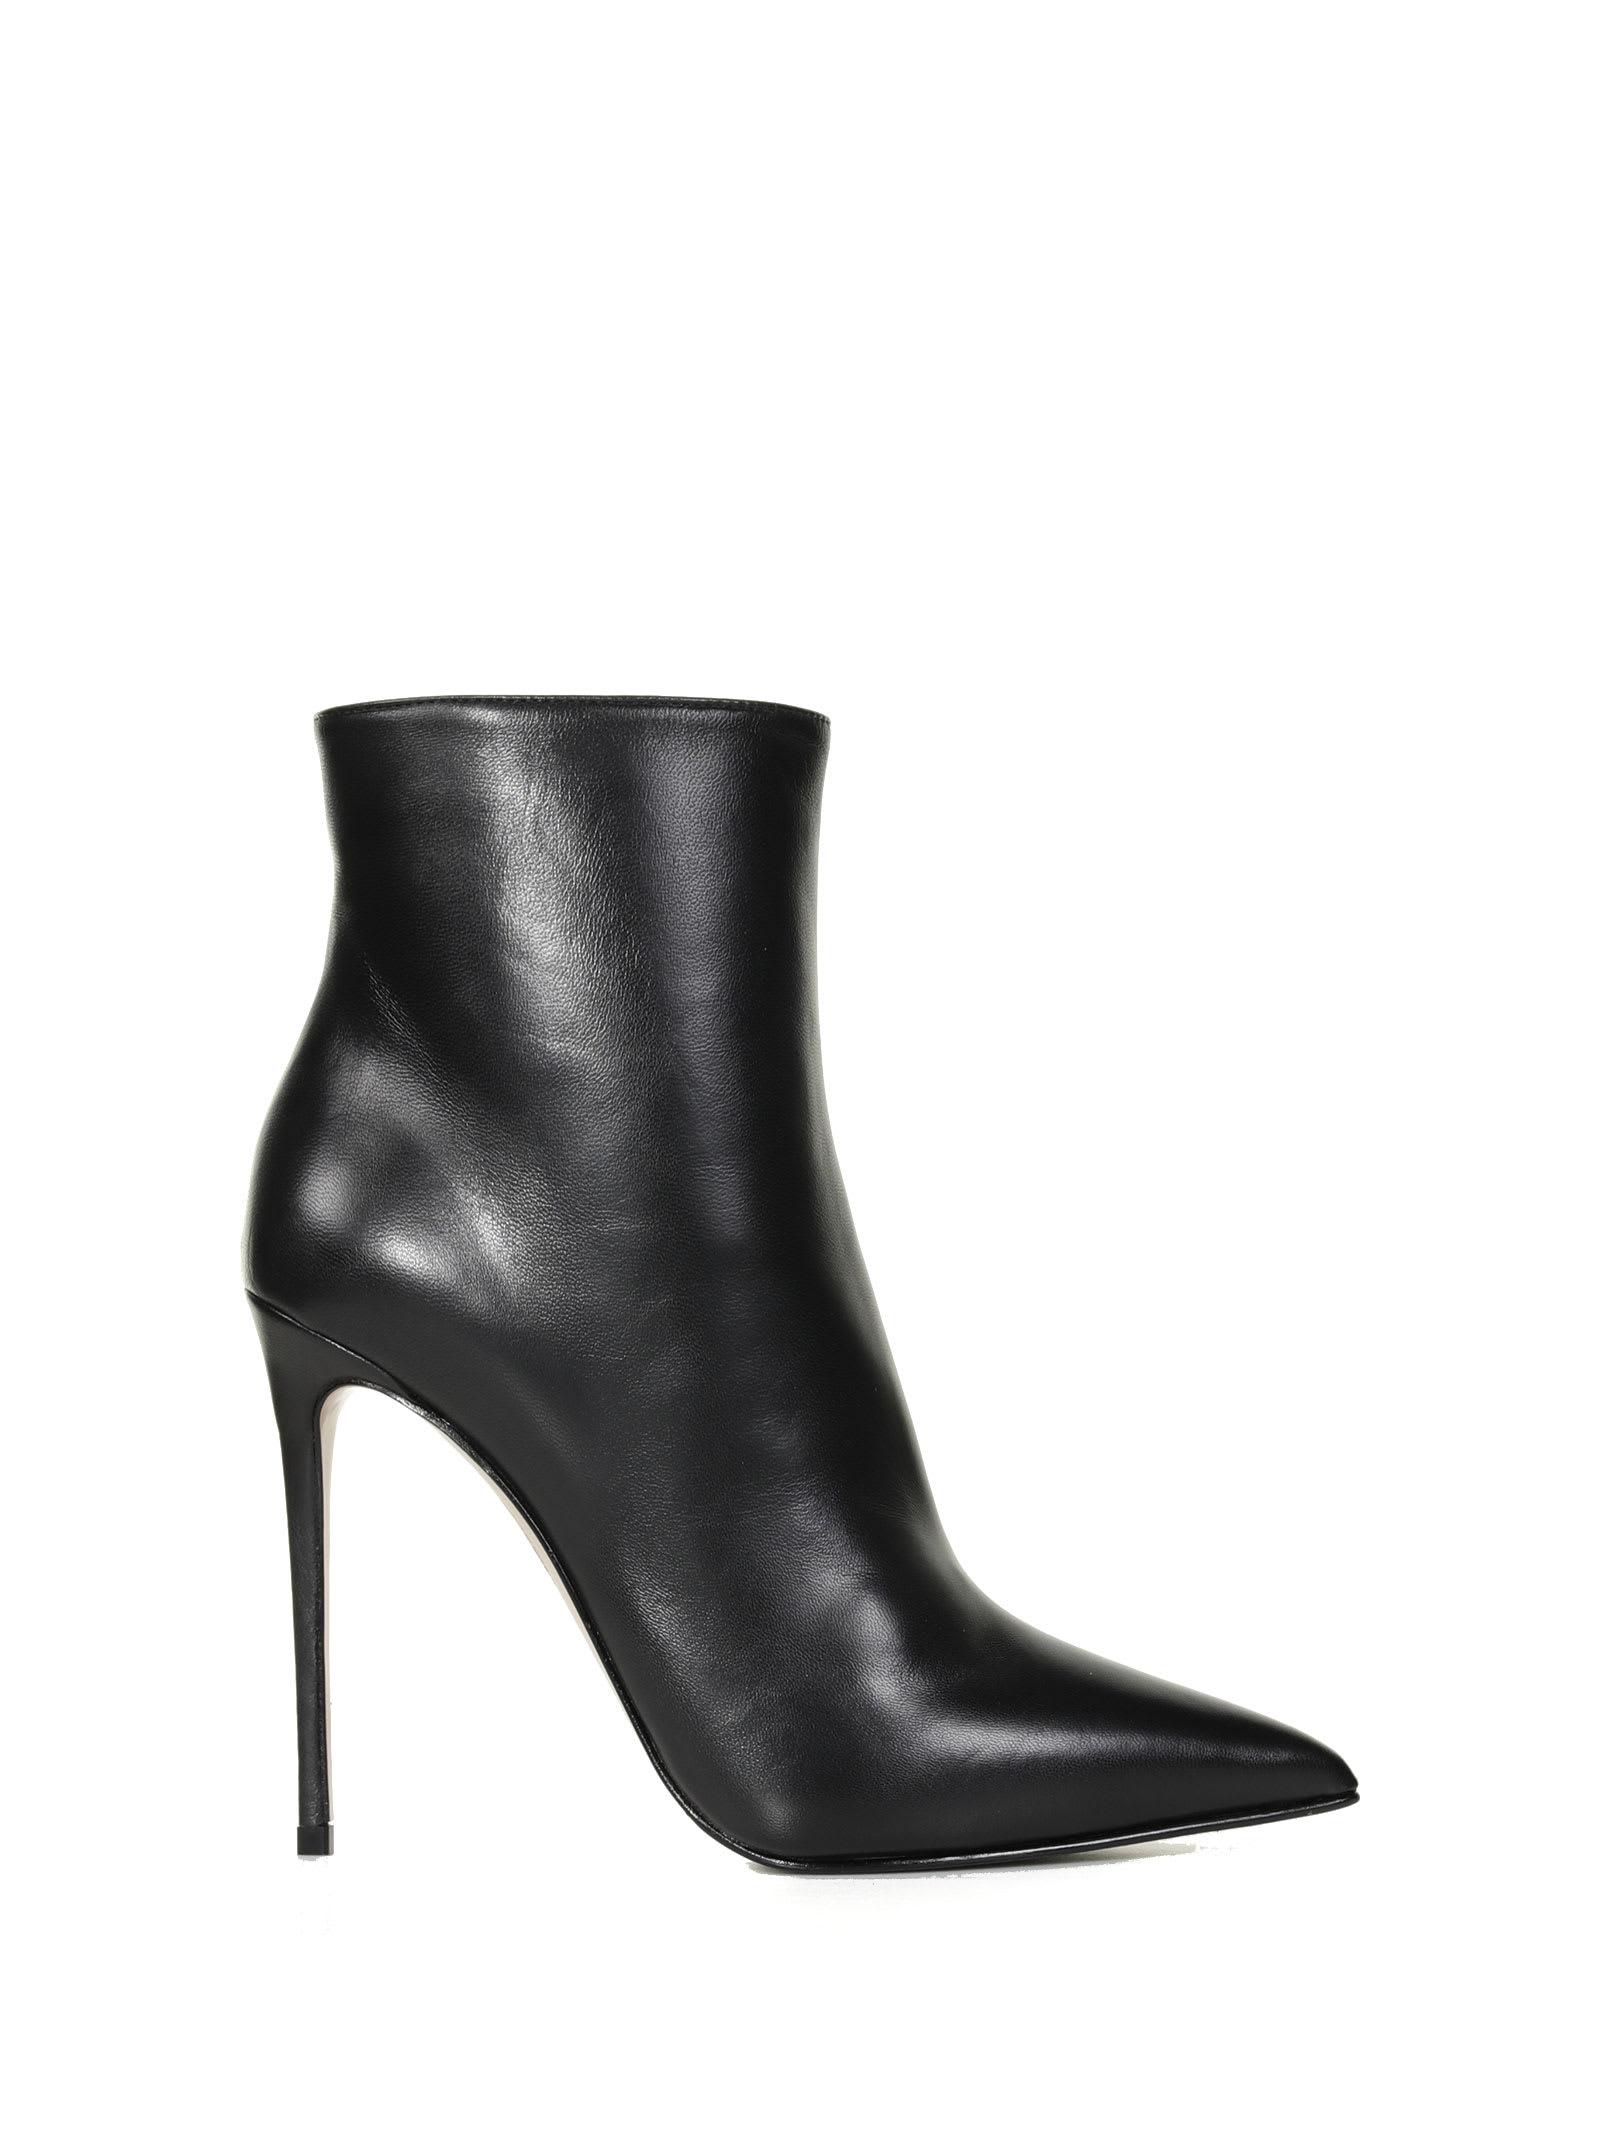 Le Silla Eva Leather Ankle Boot in Black | Lyst